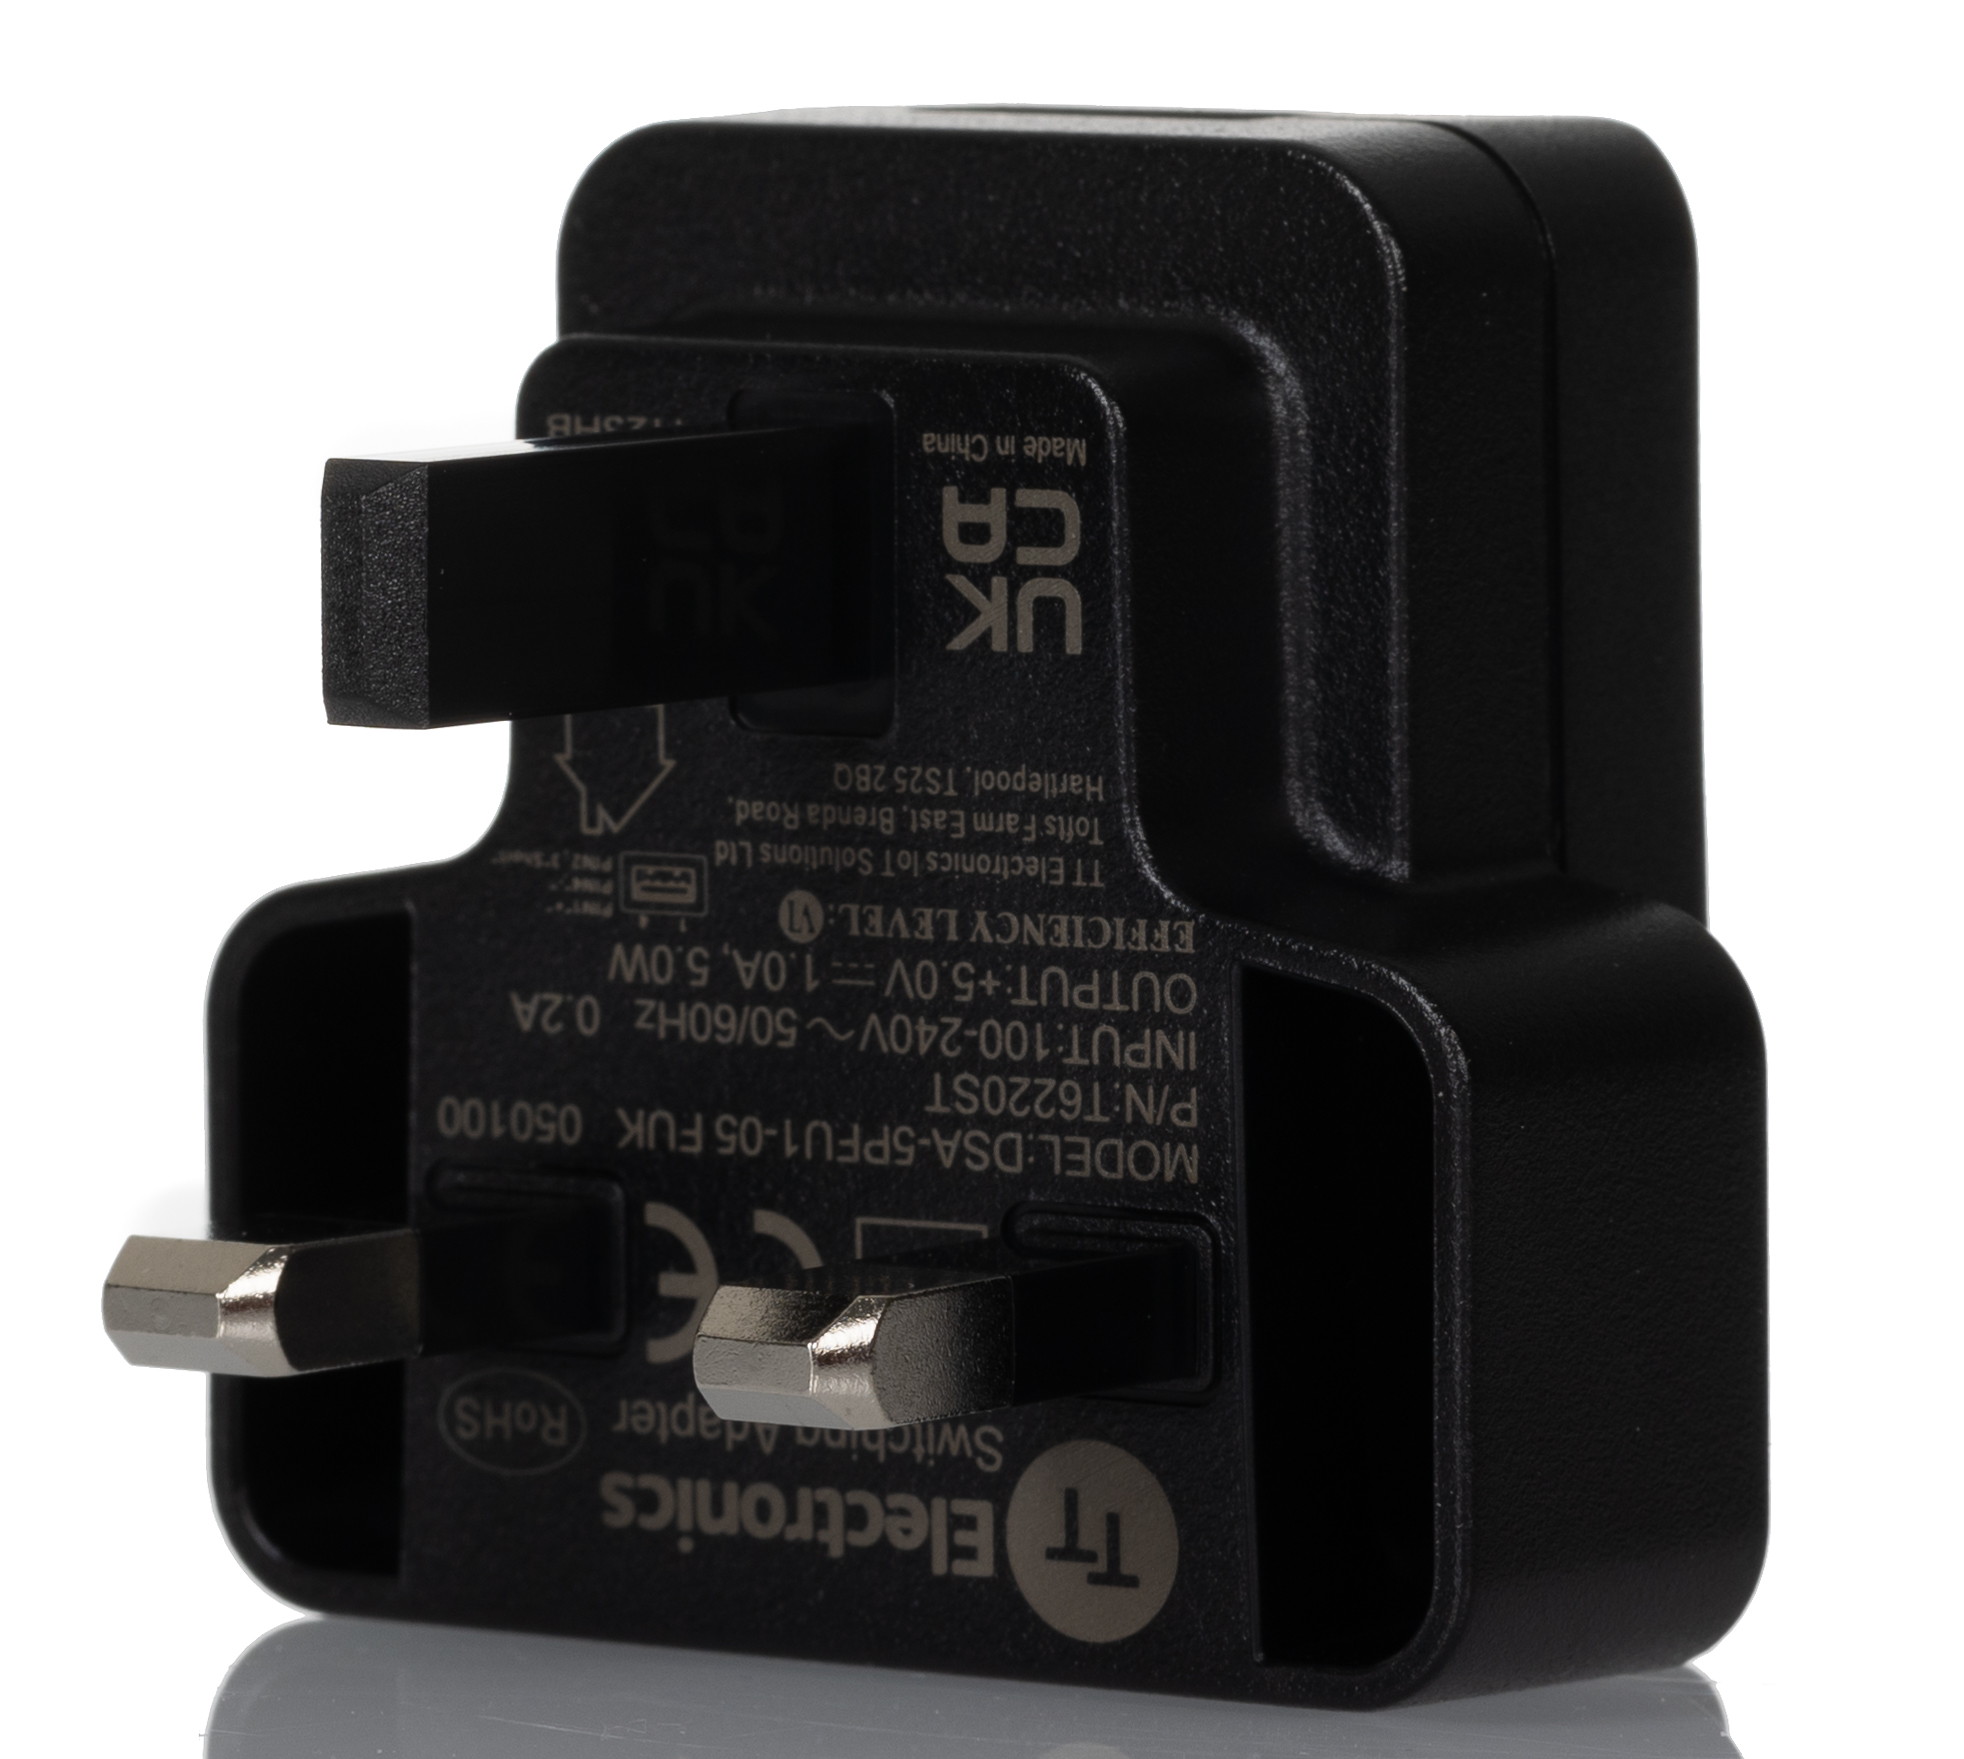 Word gek zuiden Beide A Complete Guide to AC/DC Adapters